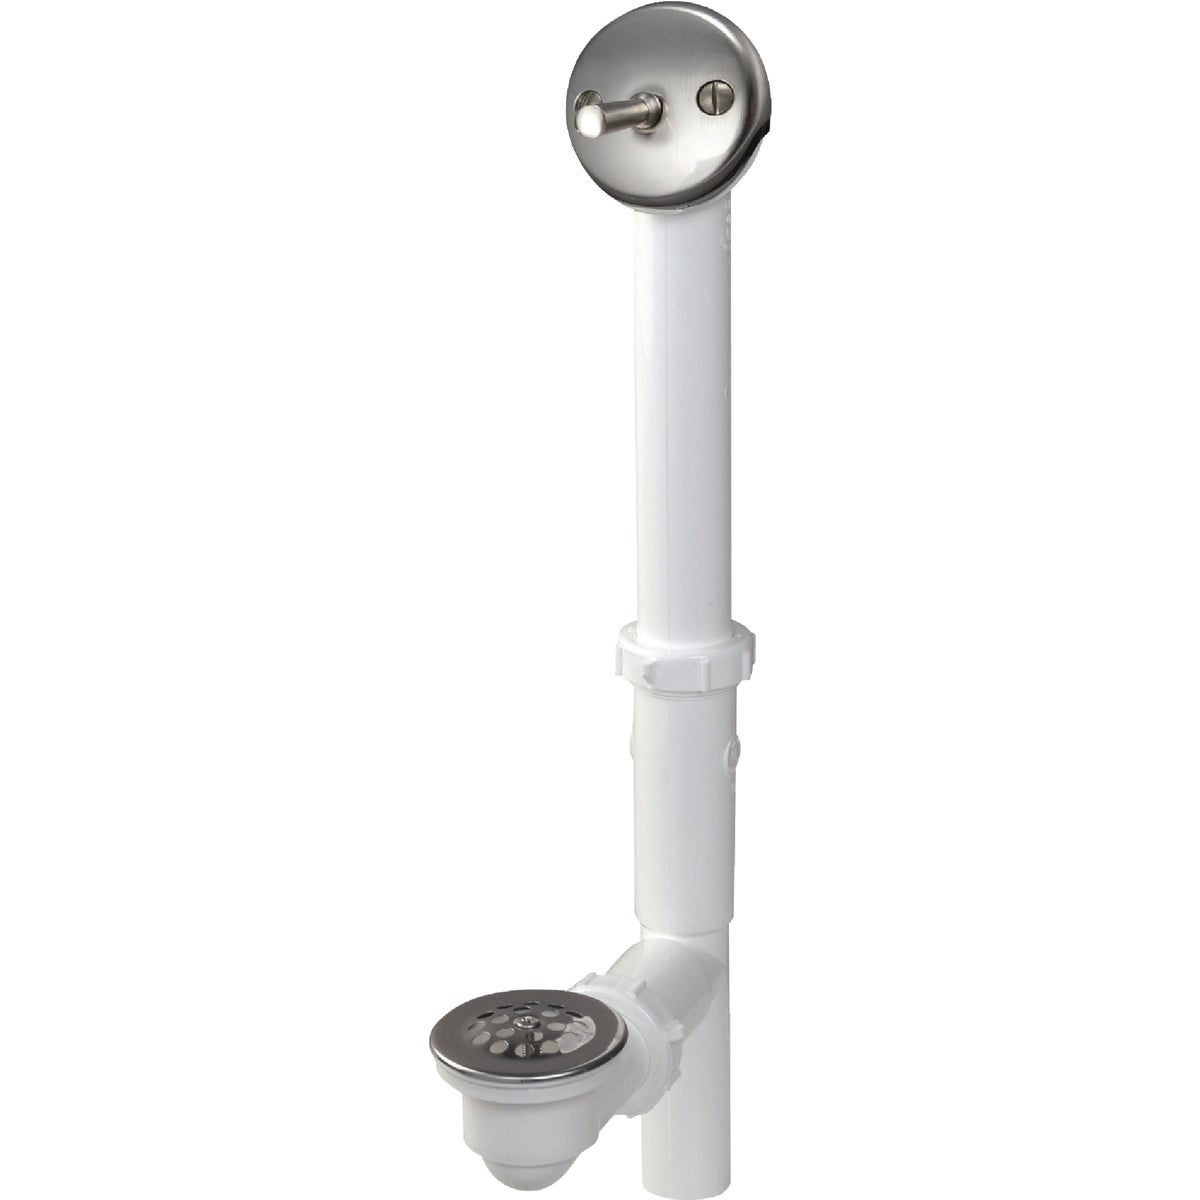 Keeney White Plastic Trip Lever Bath Drain with Brushed Nickel Trim and Strainer & Dome Grid